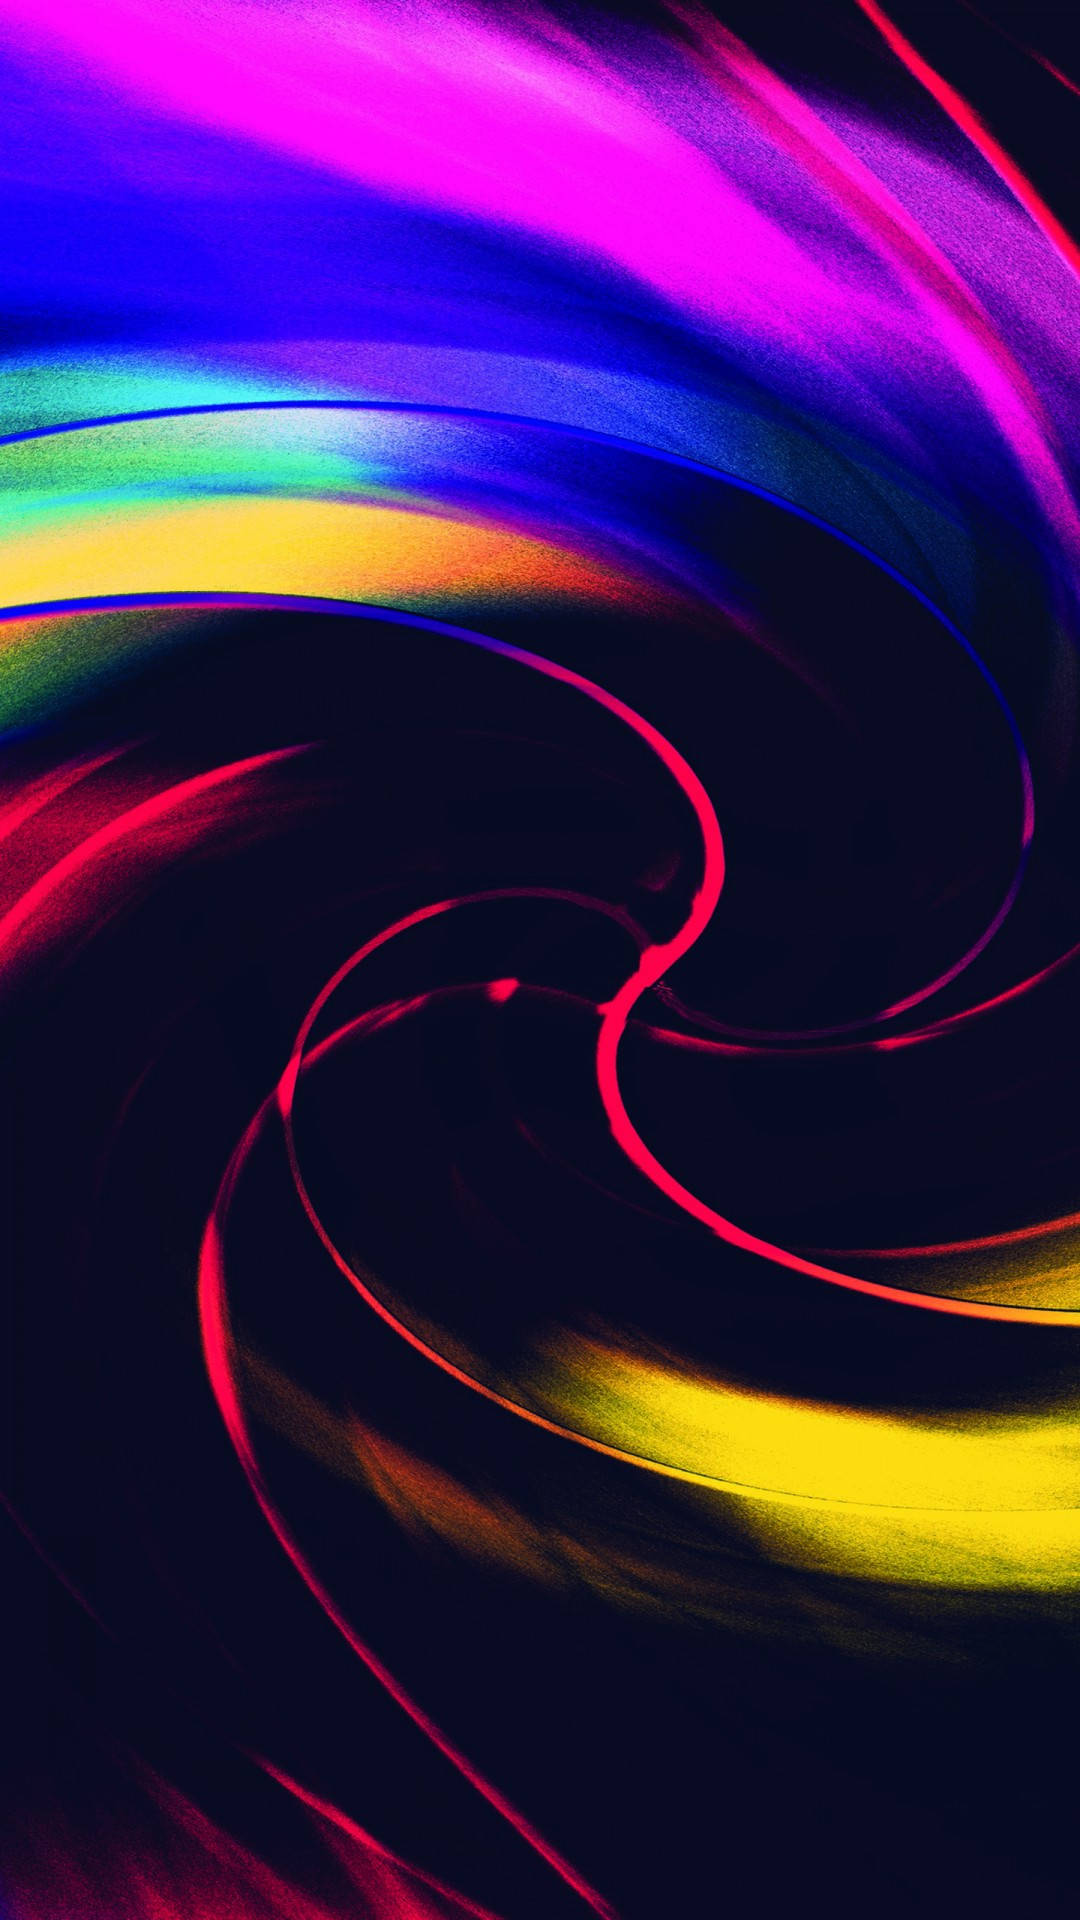 Image  "Colorful Amoled - A Dynamic Wallpaper on Any Device" Wallpaper